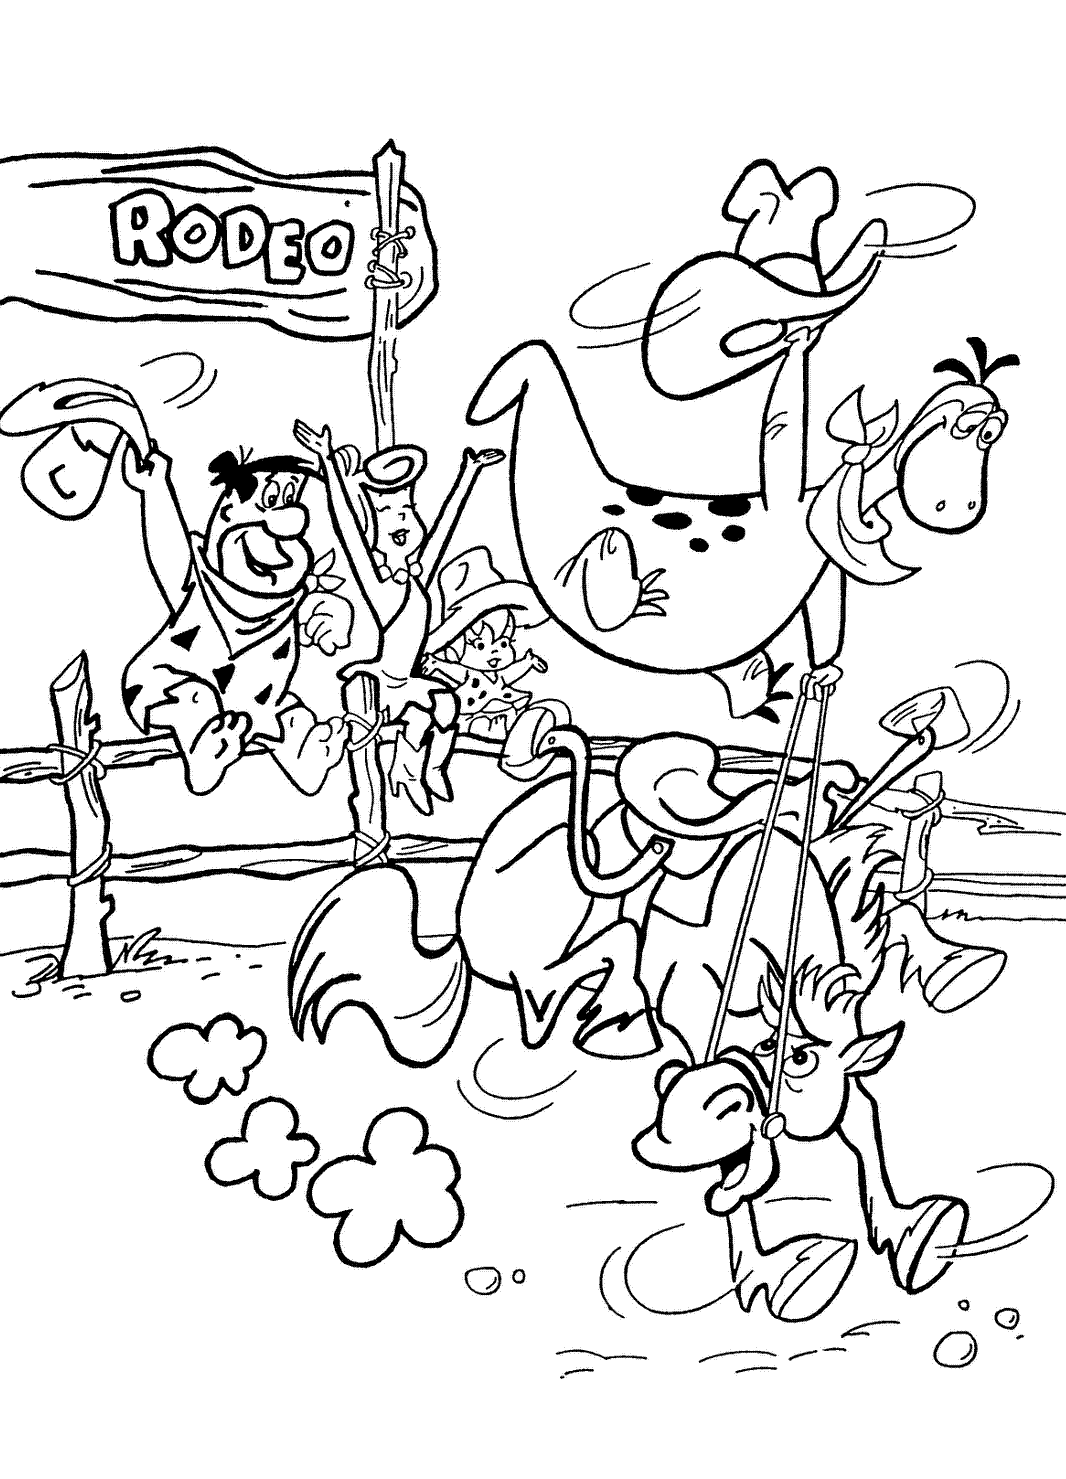 colouring book pages to print flintstones coloring pages pages colouring book to print 